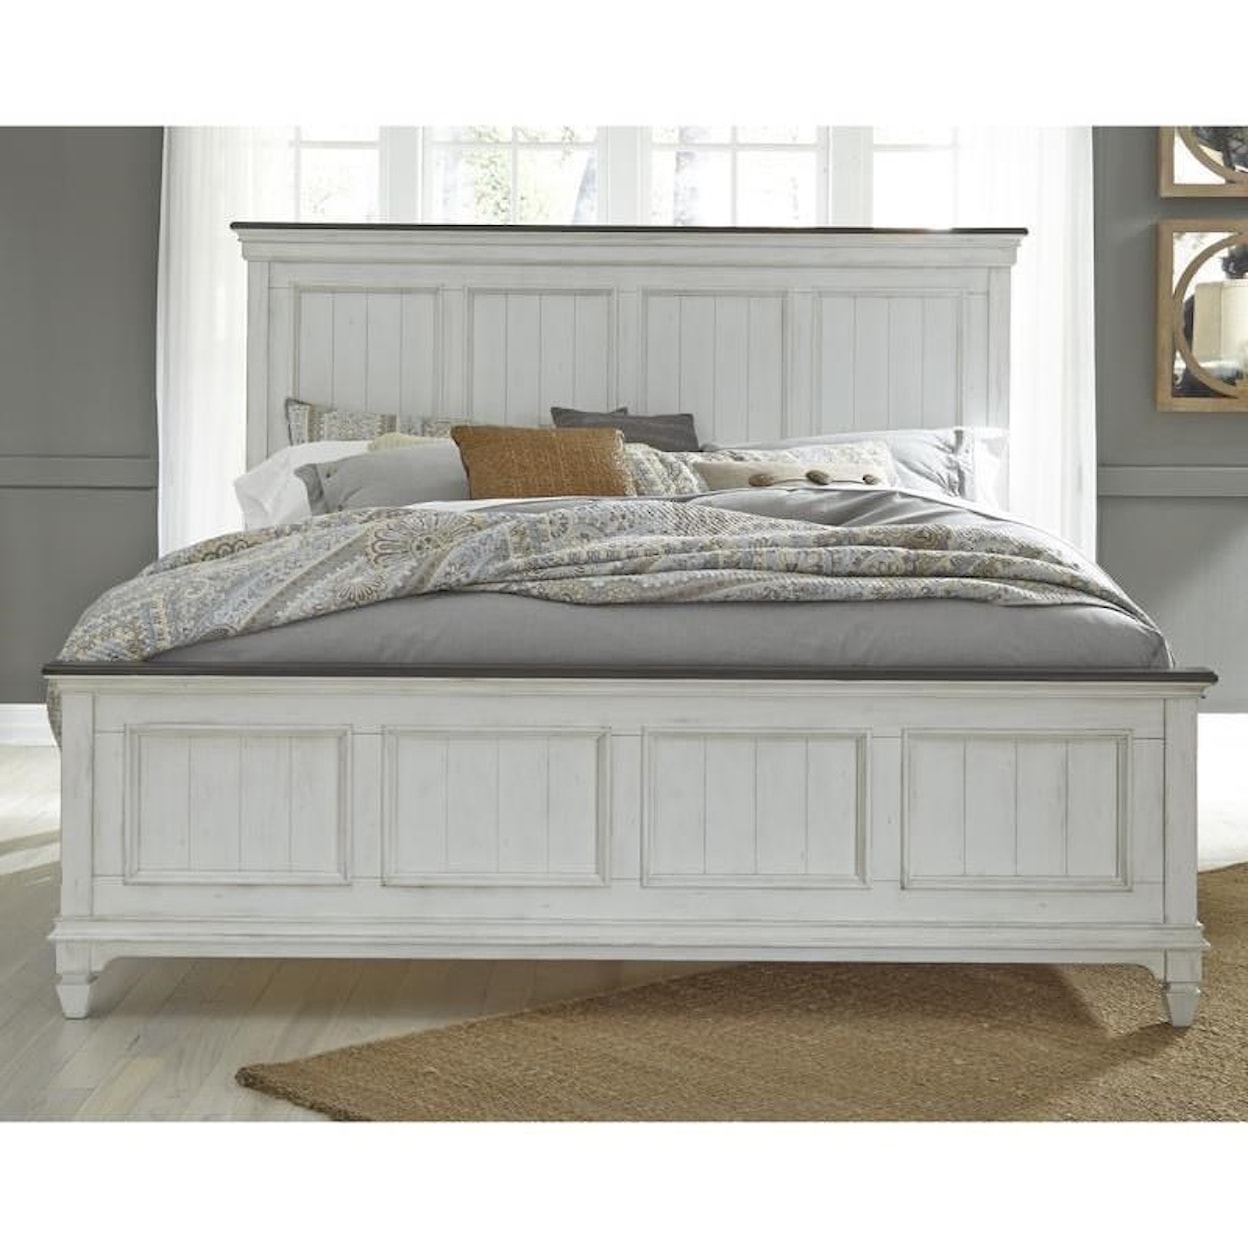 Freedom Furniture Allyson Park King Panel Bed